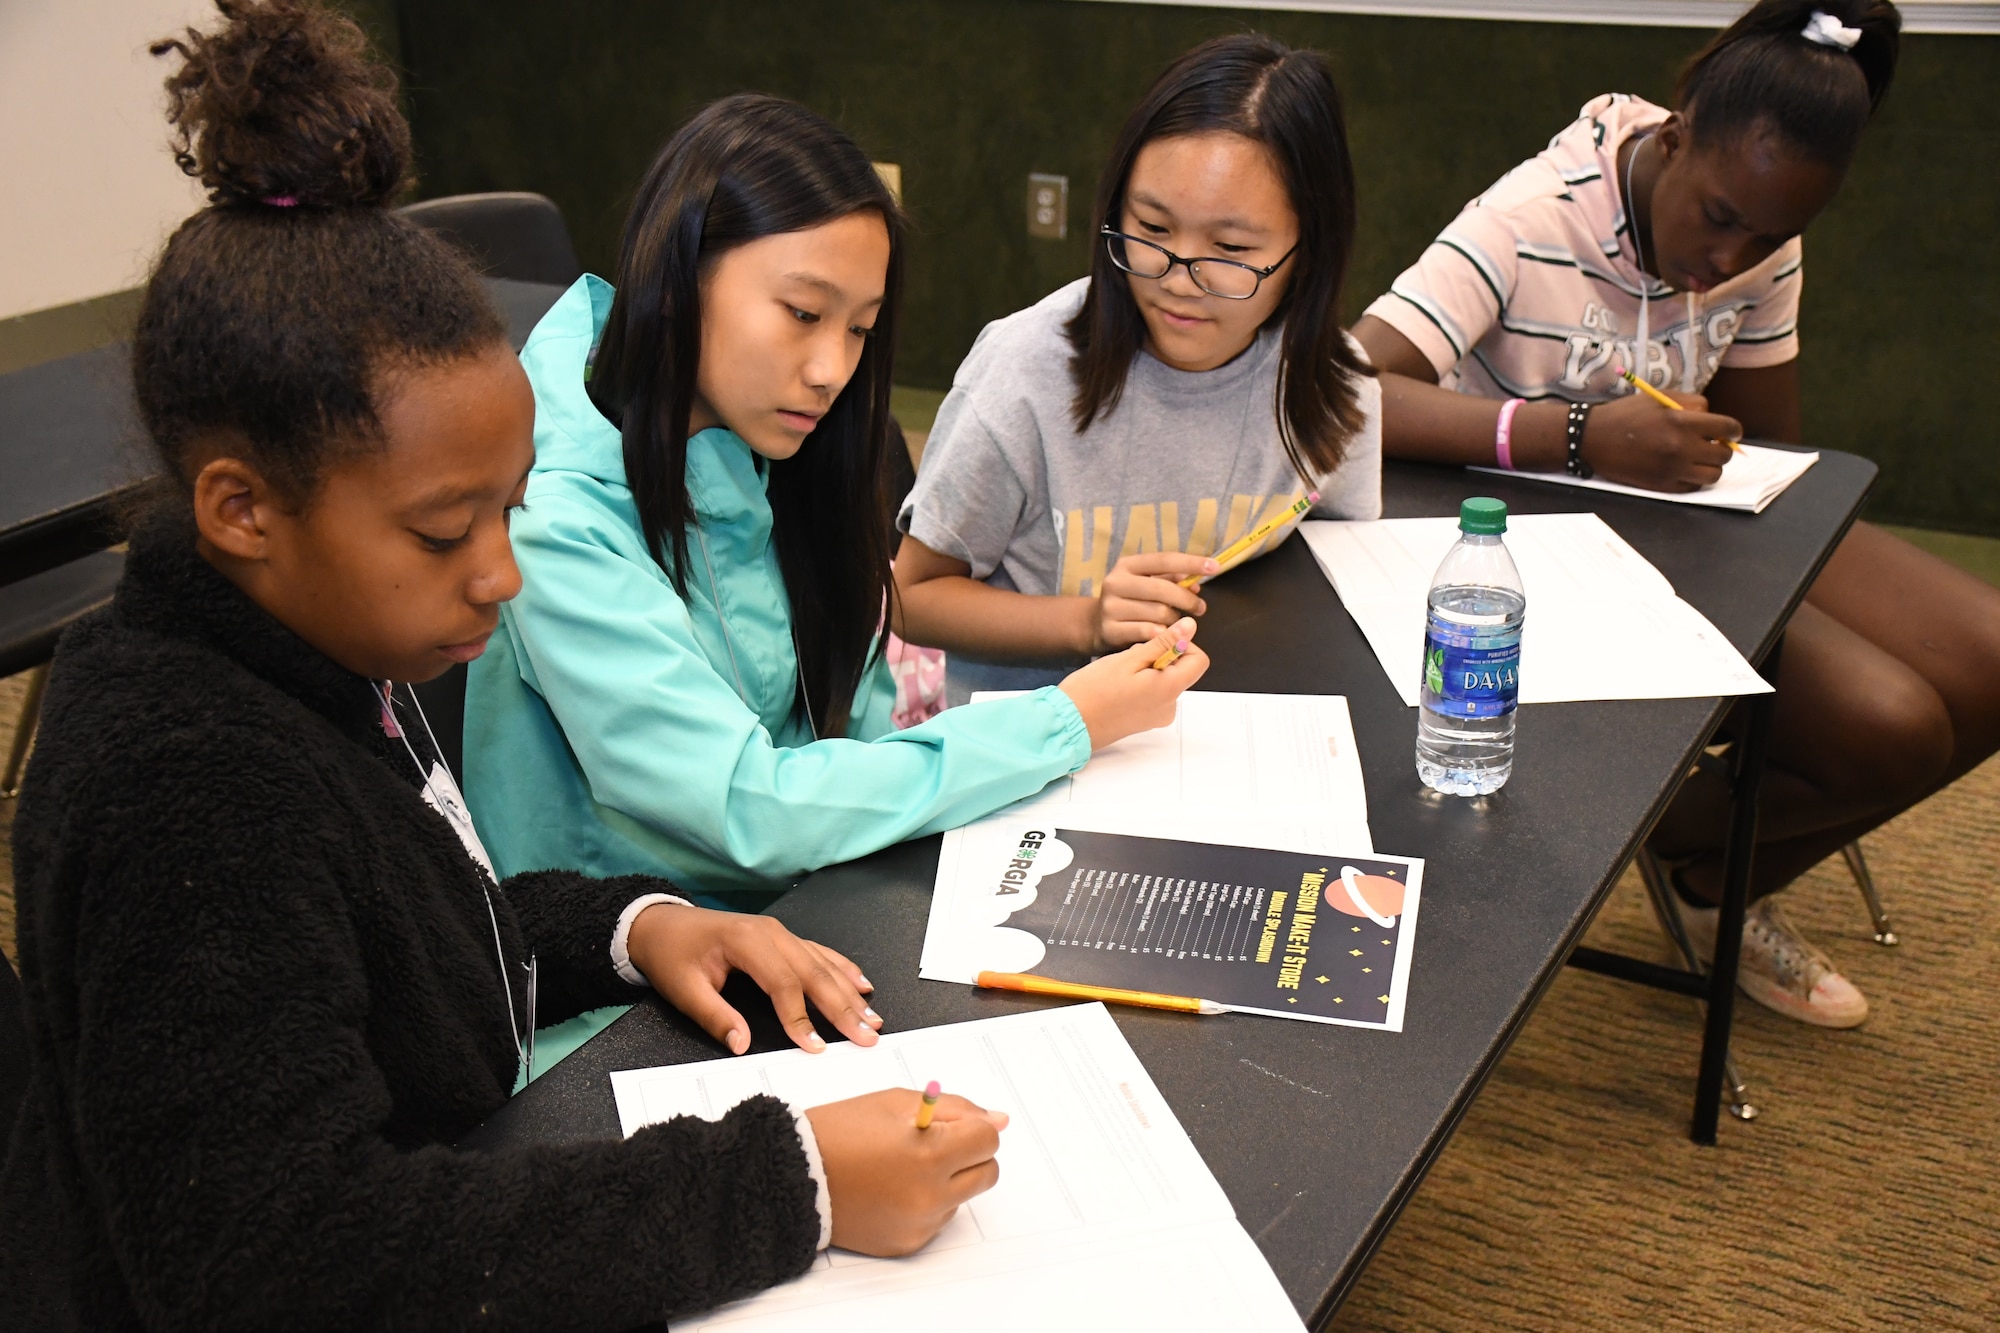 Four middle school female youth practice the engineering process to complete their space-focused mission at Rock Eagle 4-H Center in Eatonton, Ga., Aug 17, 2019.  The Air Force and space focused programming allowed youth to question and hear from Air Force personnel.    (U.S. Air Force photo by 1st Lt. Casey D. Mull)